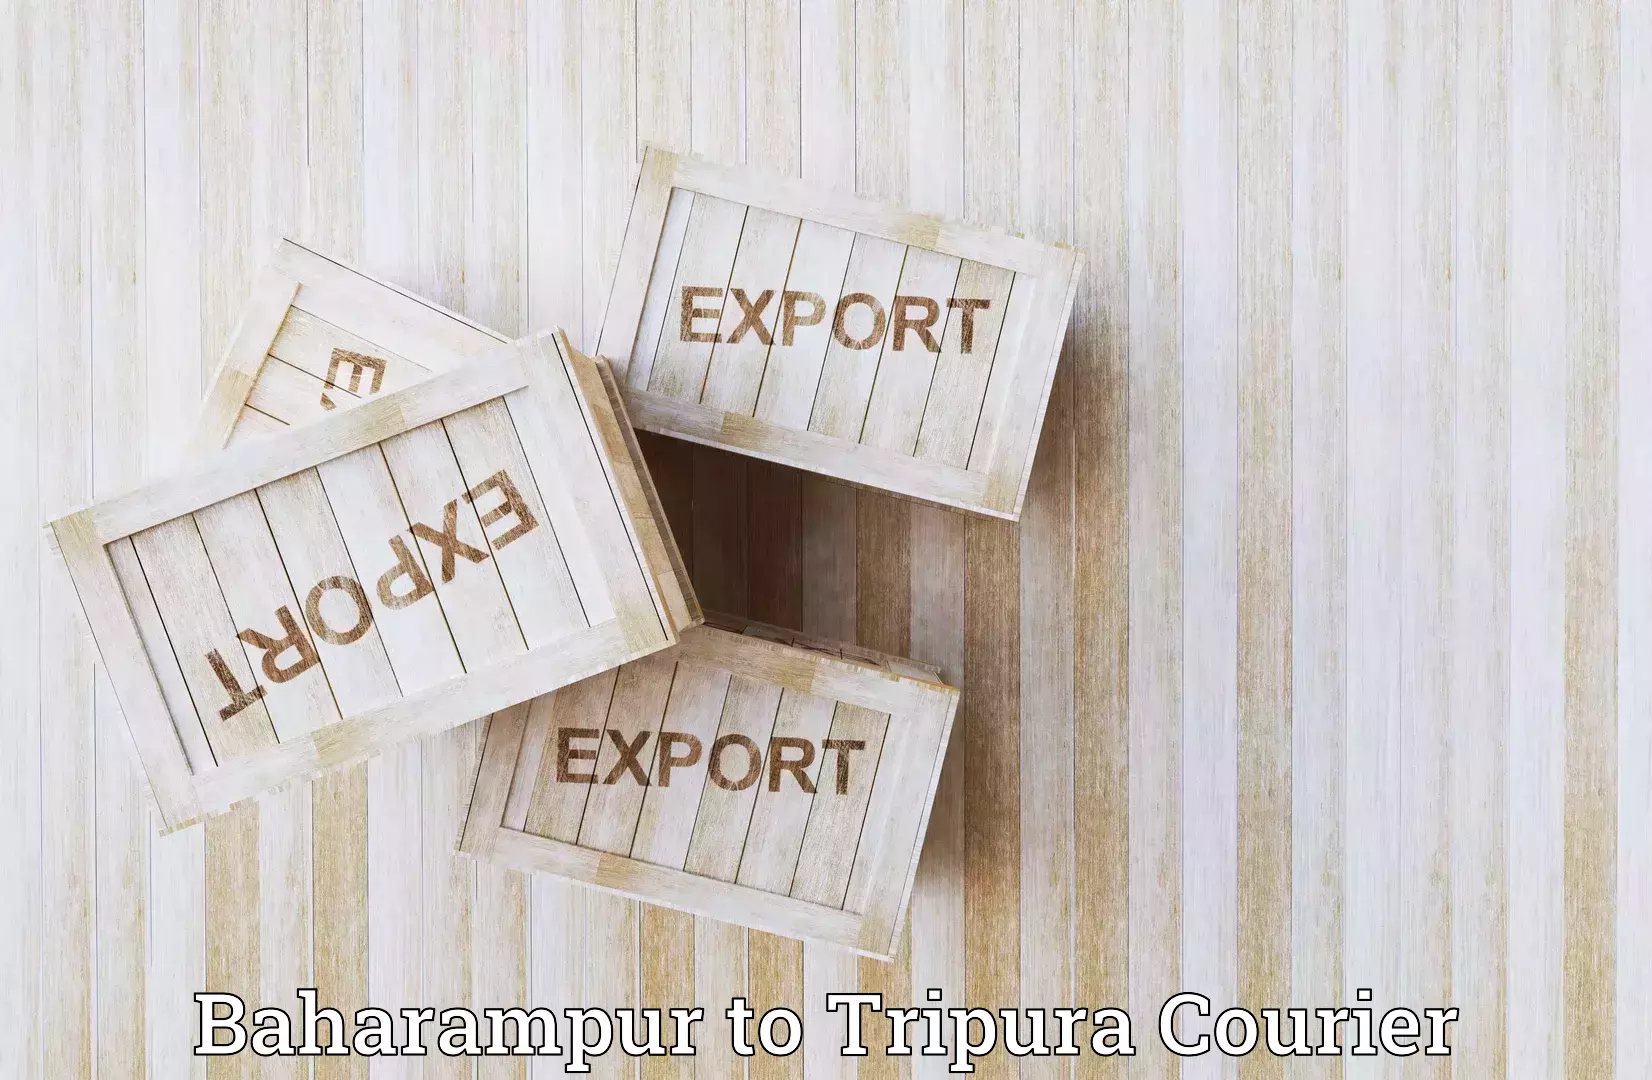 Affordable parcel service Baharampur to Tripura